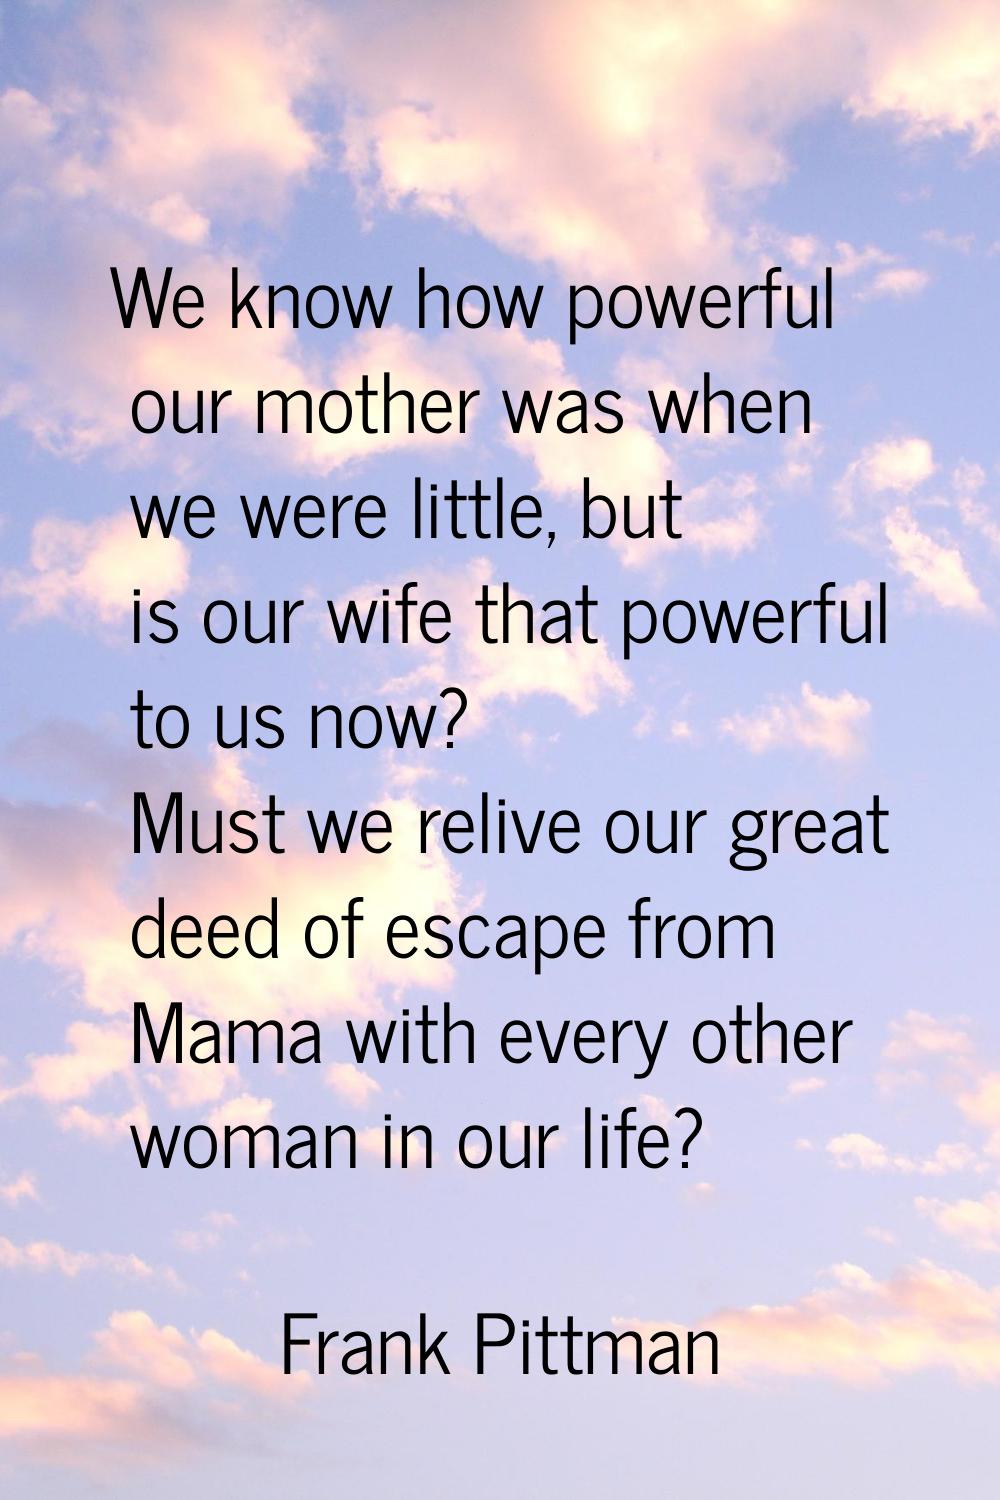 We know how powerful our mother was when we were little, but is our wife that powerful to us now? M